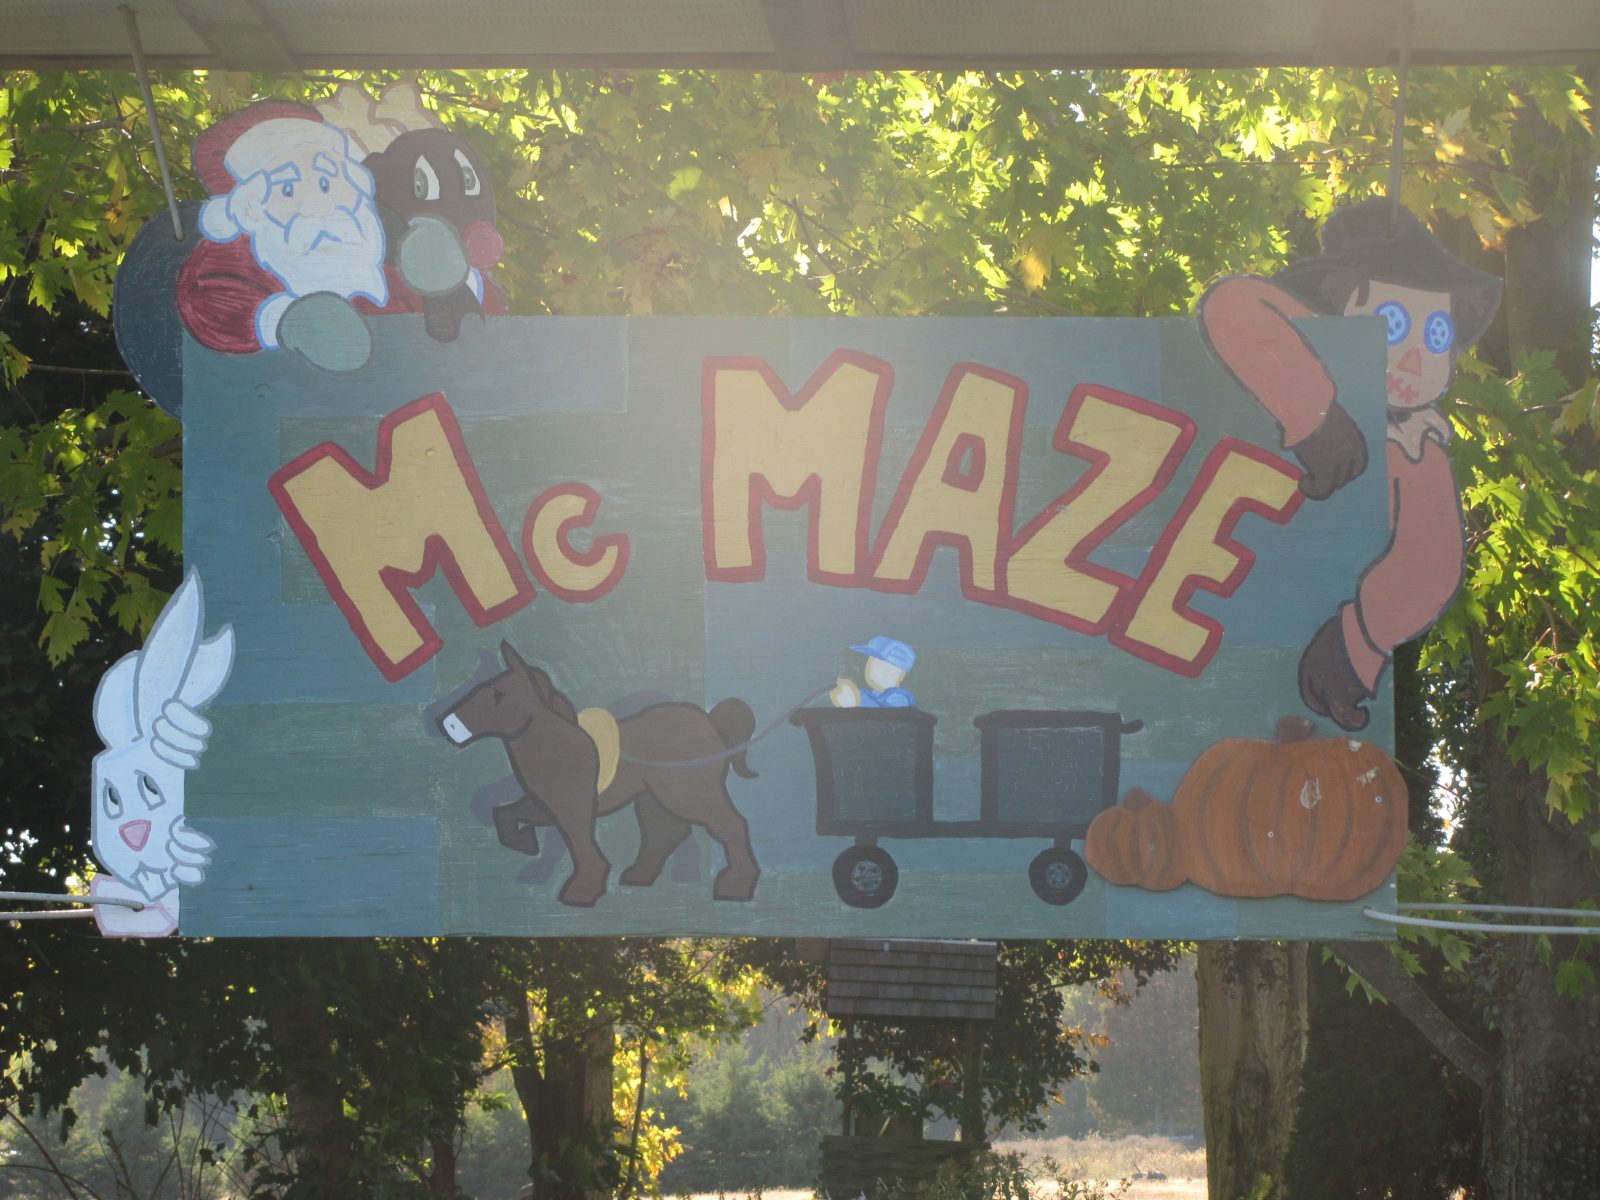 McMaze will close at the end of this month